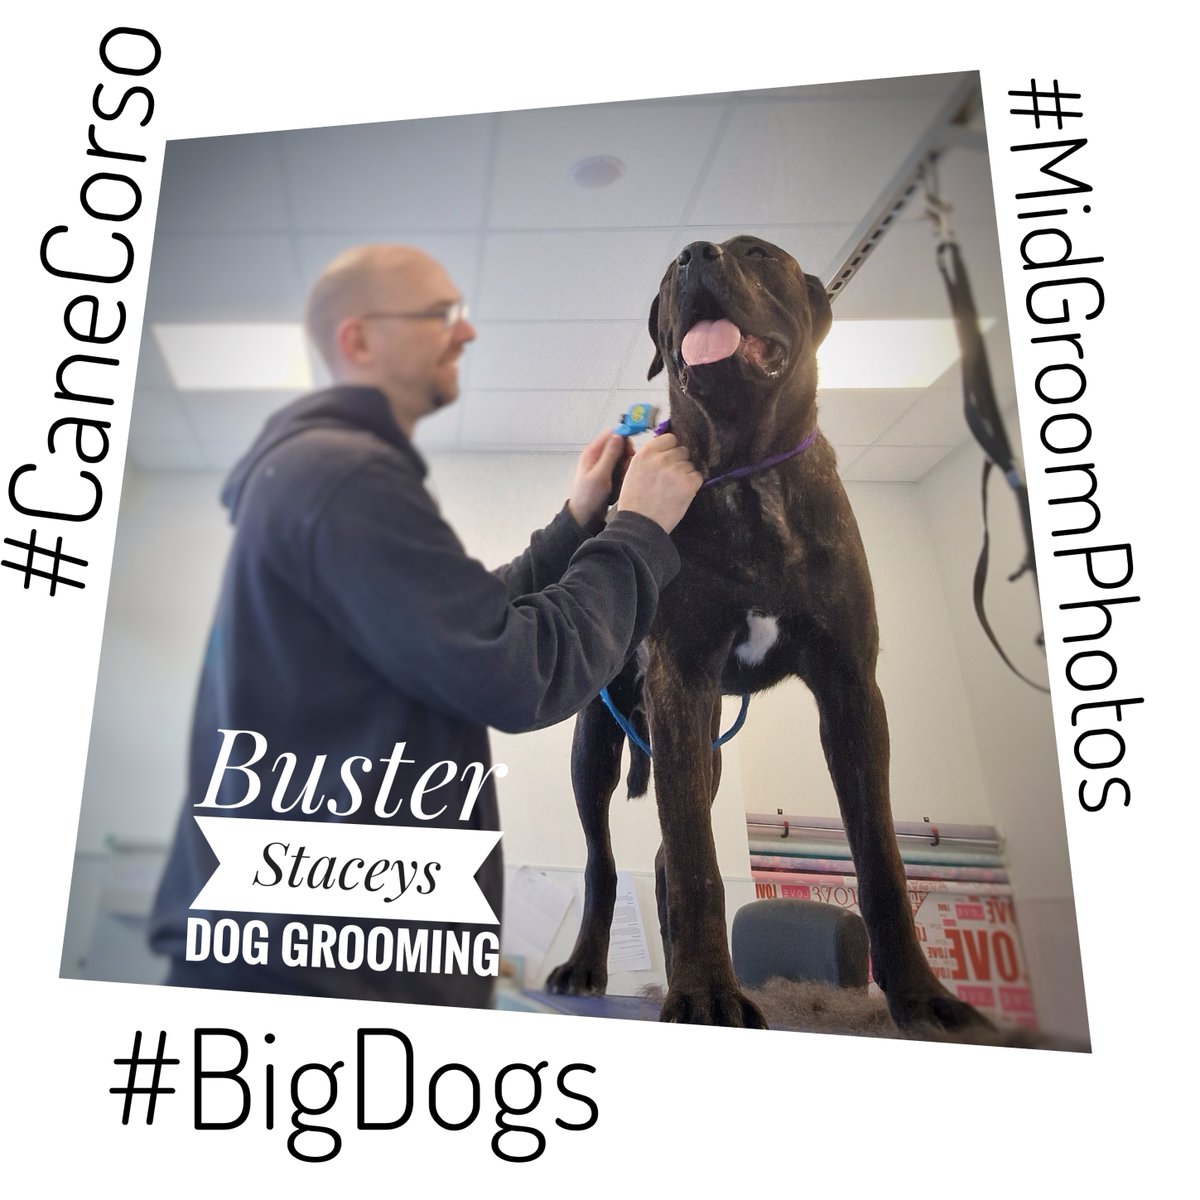 #MidGroomPhotos 

Cant remember if i posted these are not, but Buster was a lovely #BigDog #CaneCorso and we dont see enough of them. 

 #dogsOfFacebook #Leyland #dogGrooming #cleanteeth #DidYouKnowWeCleanTeeth #fun #dogteethbrushing #Lancashire #pets #StaceysDogGrooming